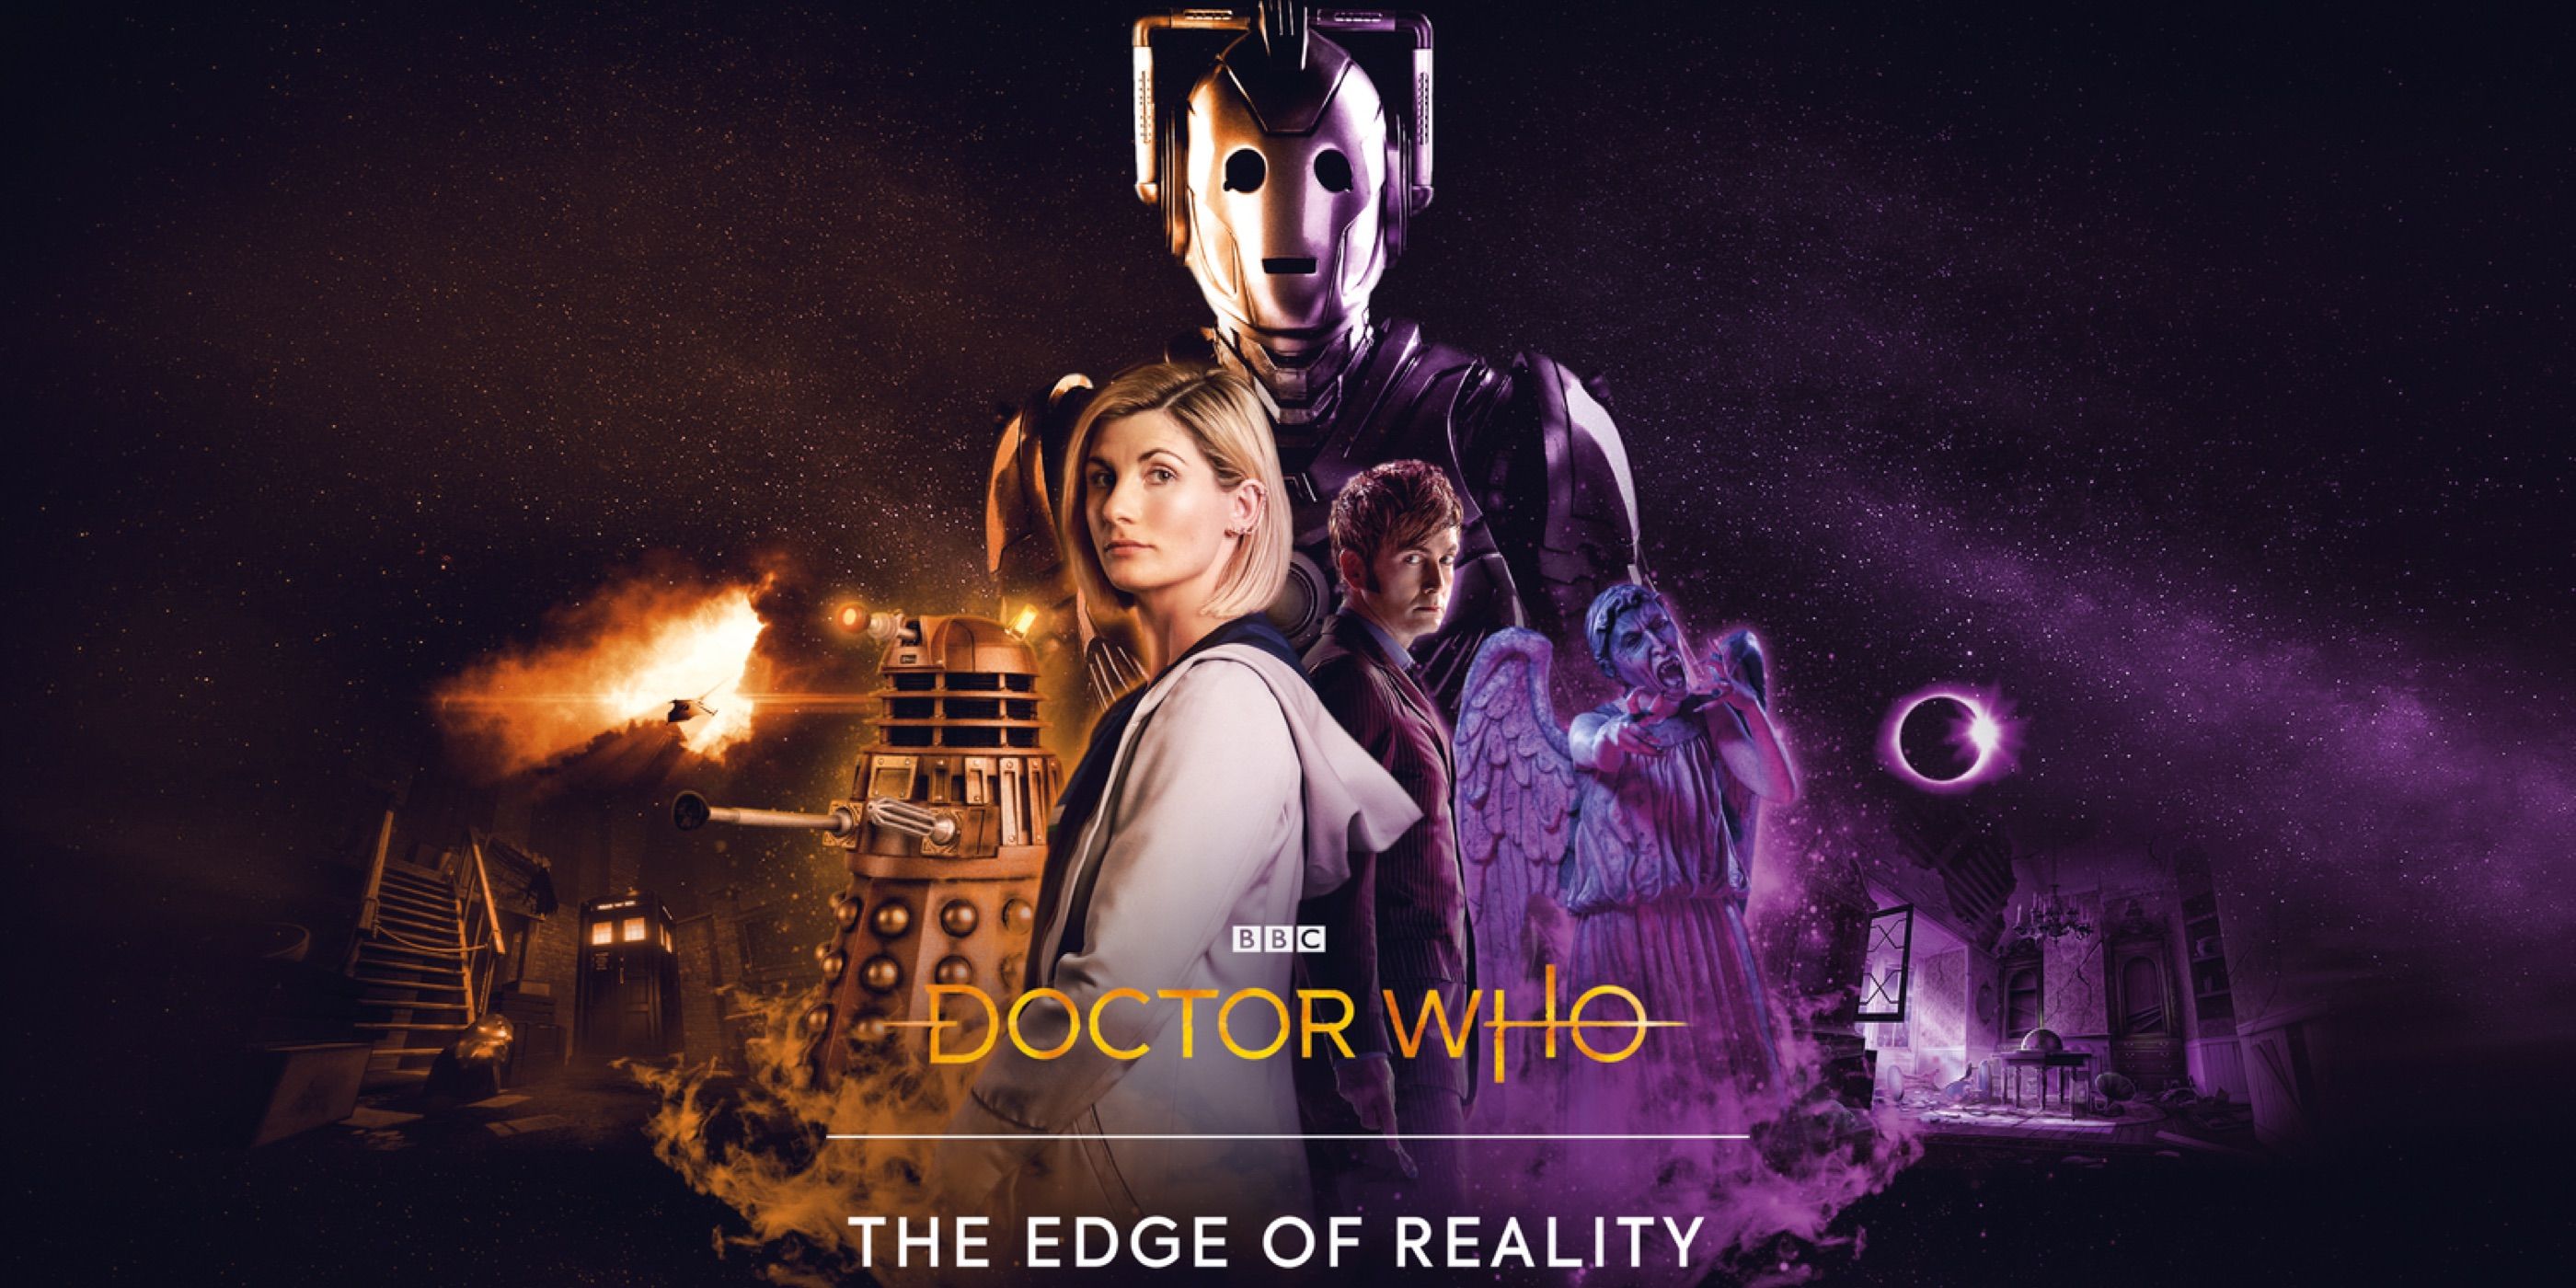 Doctor Who The Edge of Reality Trailer Reveals Release Date for